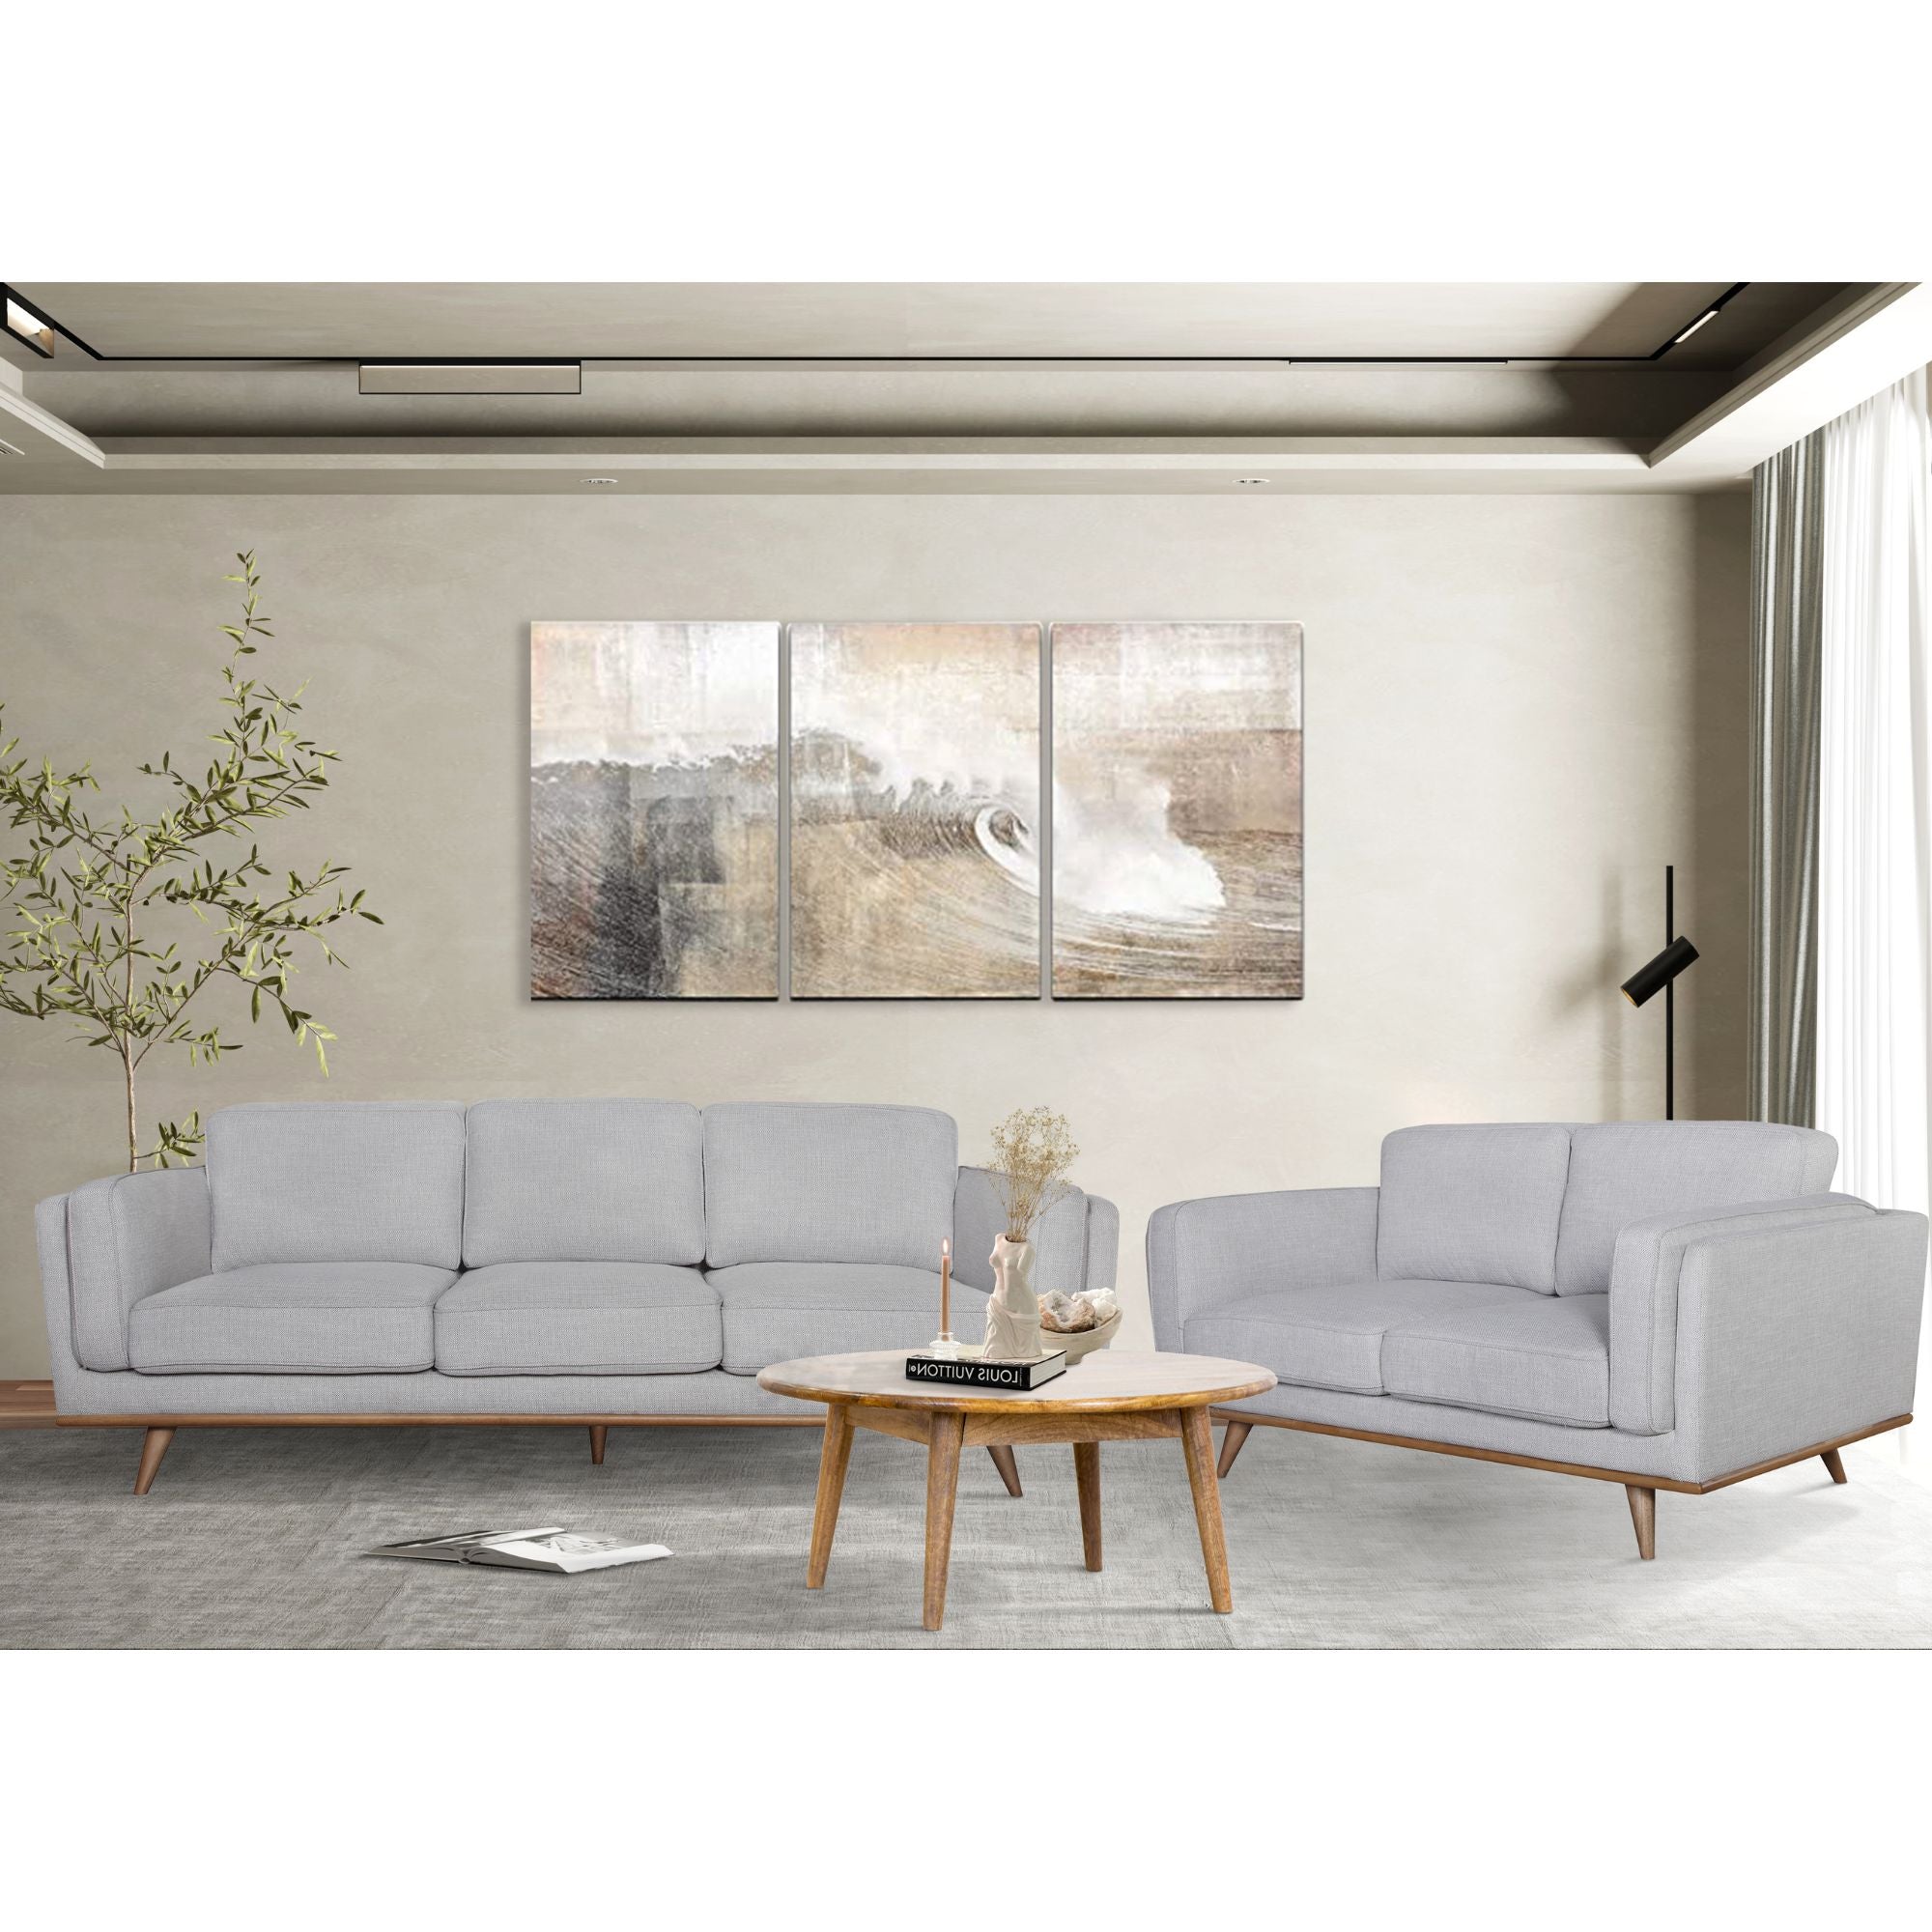 Petalsoft 2 + 3 Seater Sofa Set Fabric Uplholstered Lounge Couch - Grey.